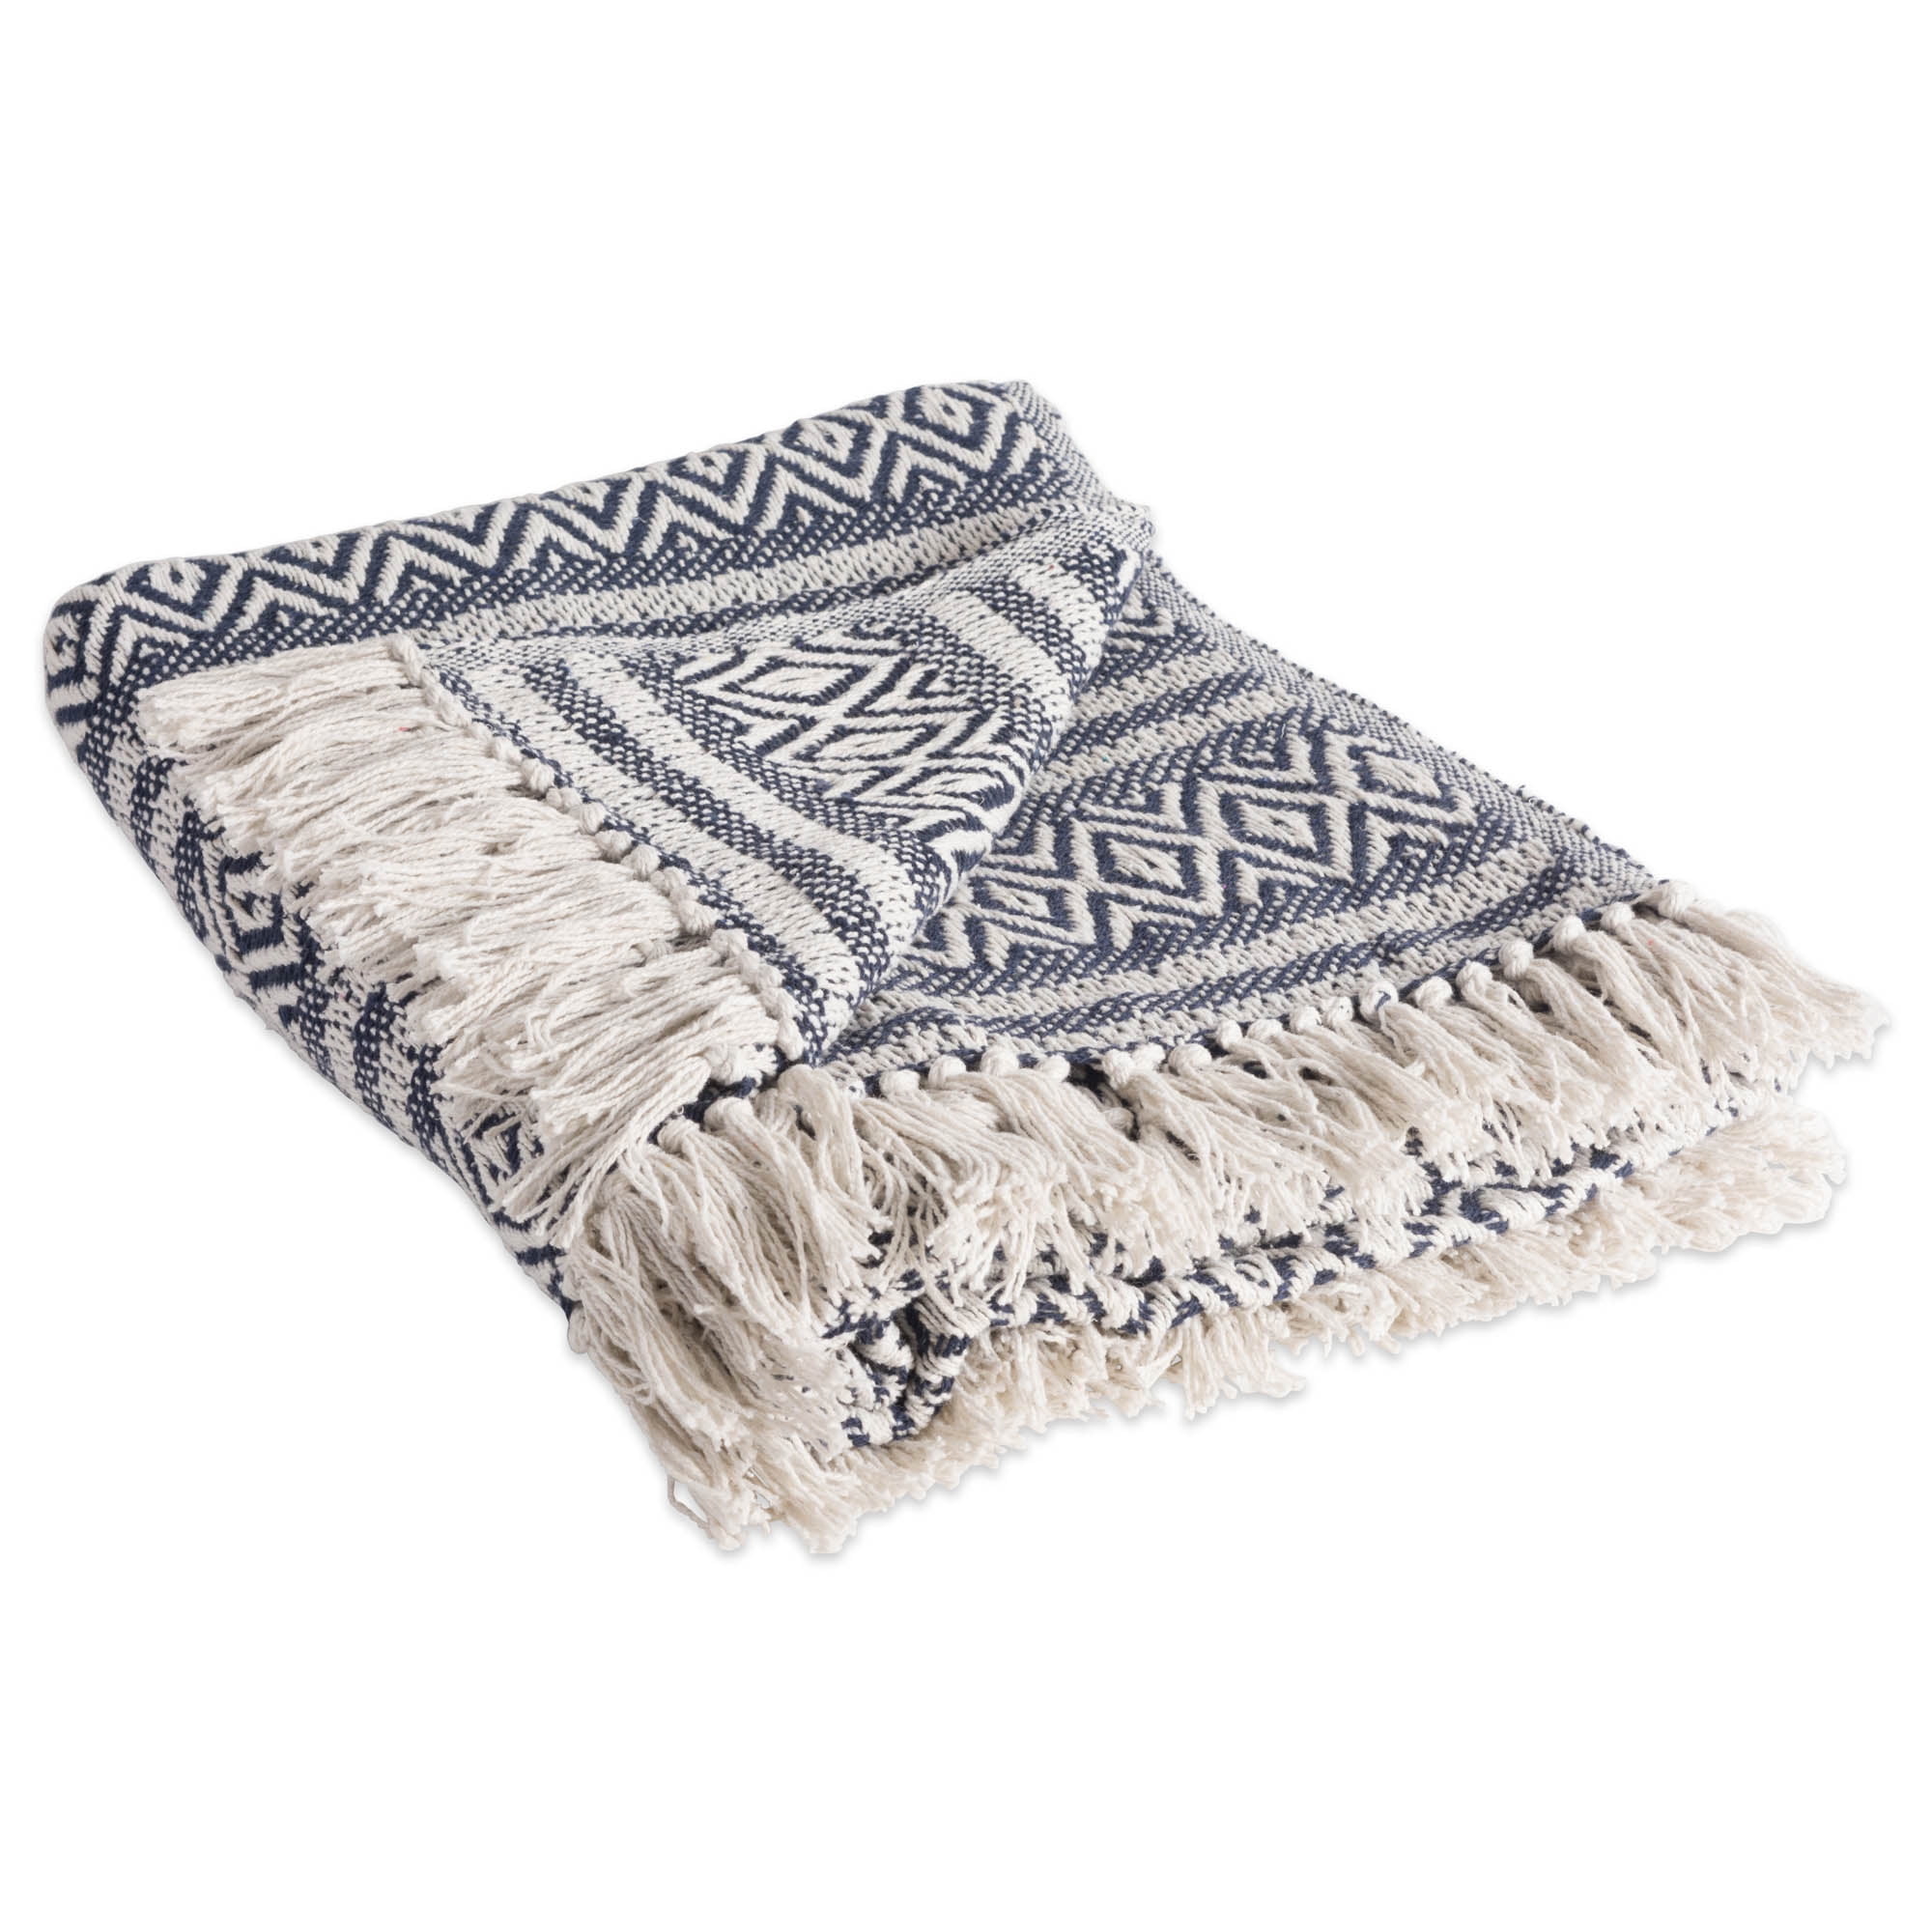 Dii Rustic Farmhouse Cotton Chevron Blanket Throw With Fringe for Chair Couch for sale online 